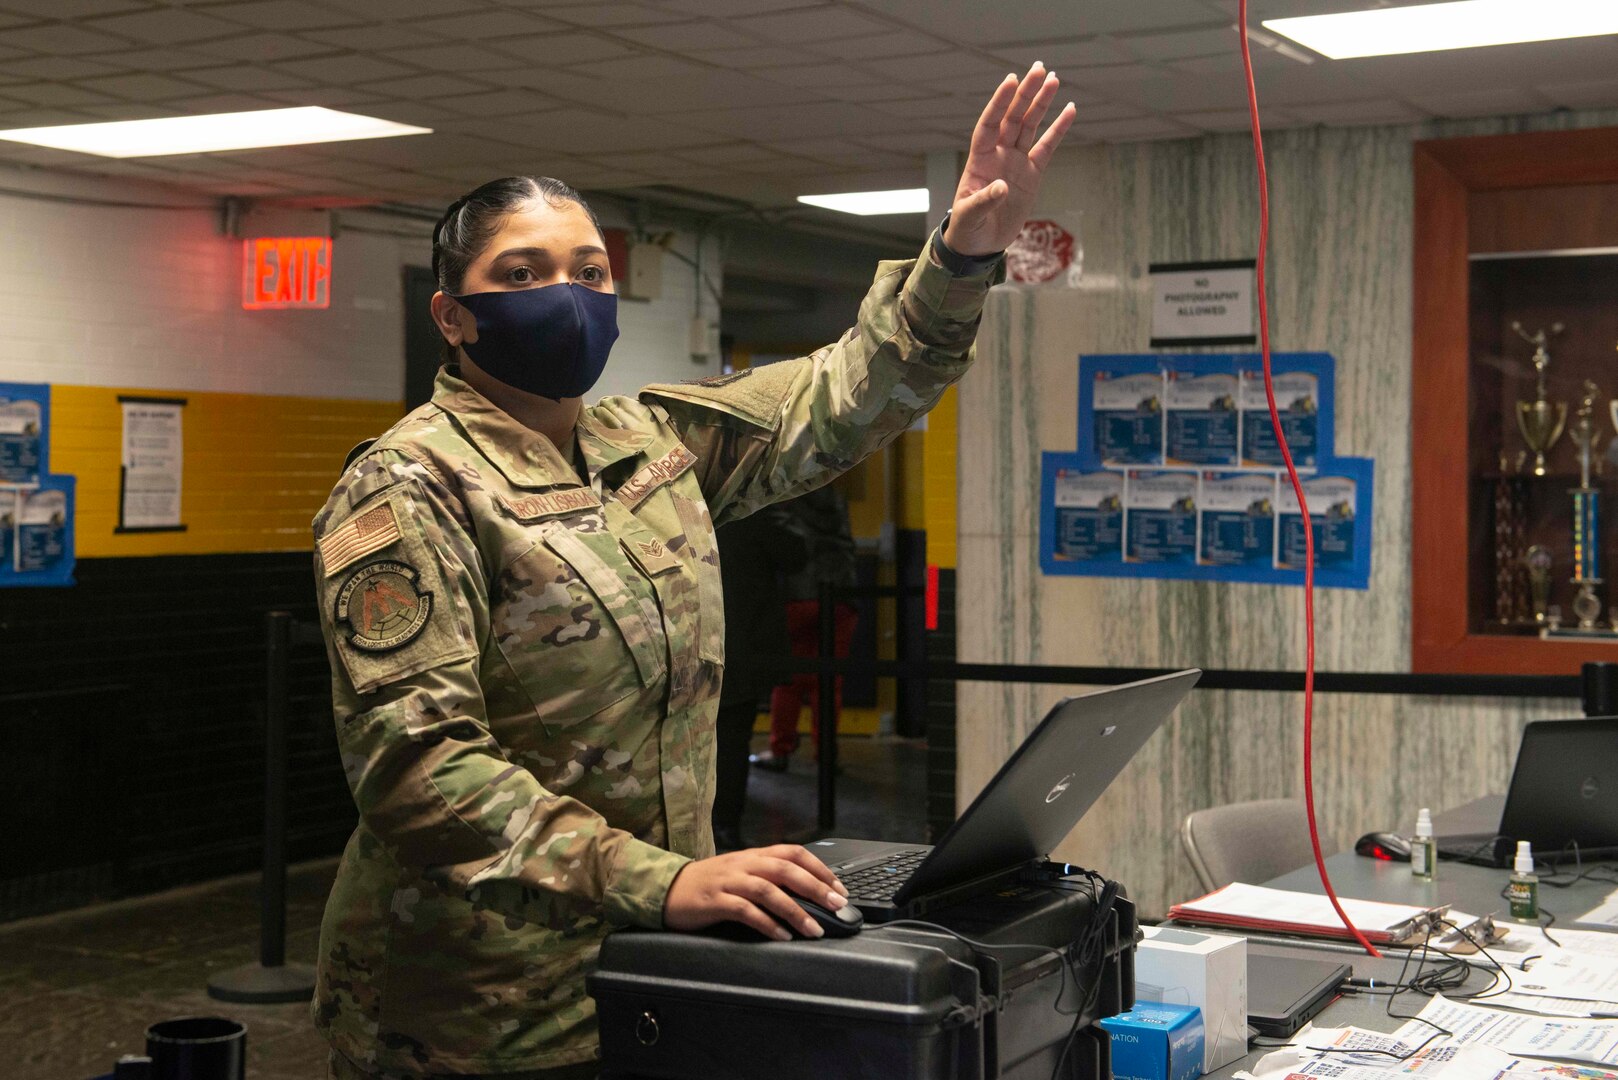 U.S. Air Force Staff Sgt. Madeline Negron-Lisboa, from Norwich, Connecticut, and a general purpose Airman assigned to the 335th Expeditionary Medical Operations Squadron, waves to invite a community member to check-in at the state-led, federally-supported Medgar Evers College Community Vaccination Center in Brooklyn, New York, on March 22, 2021.